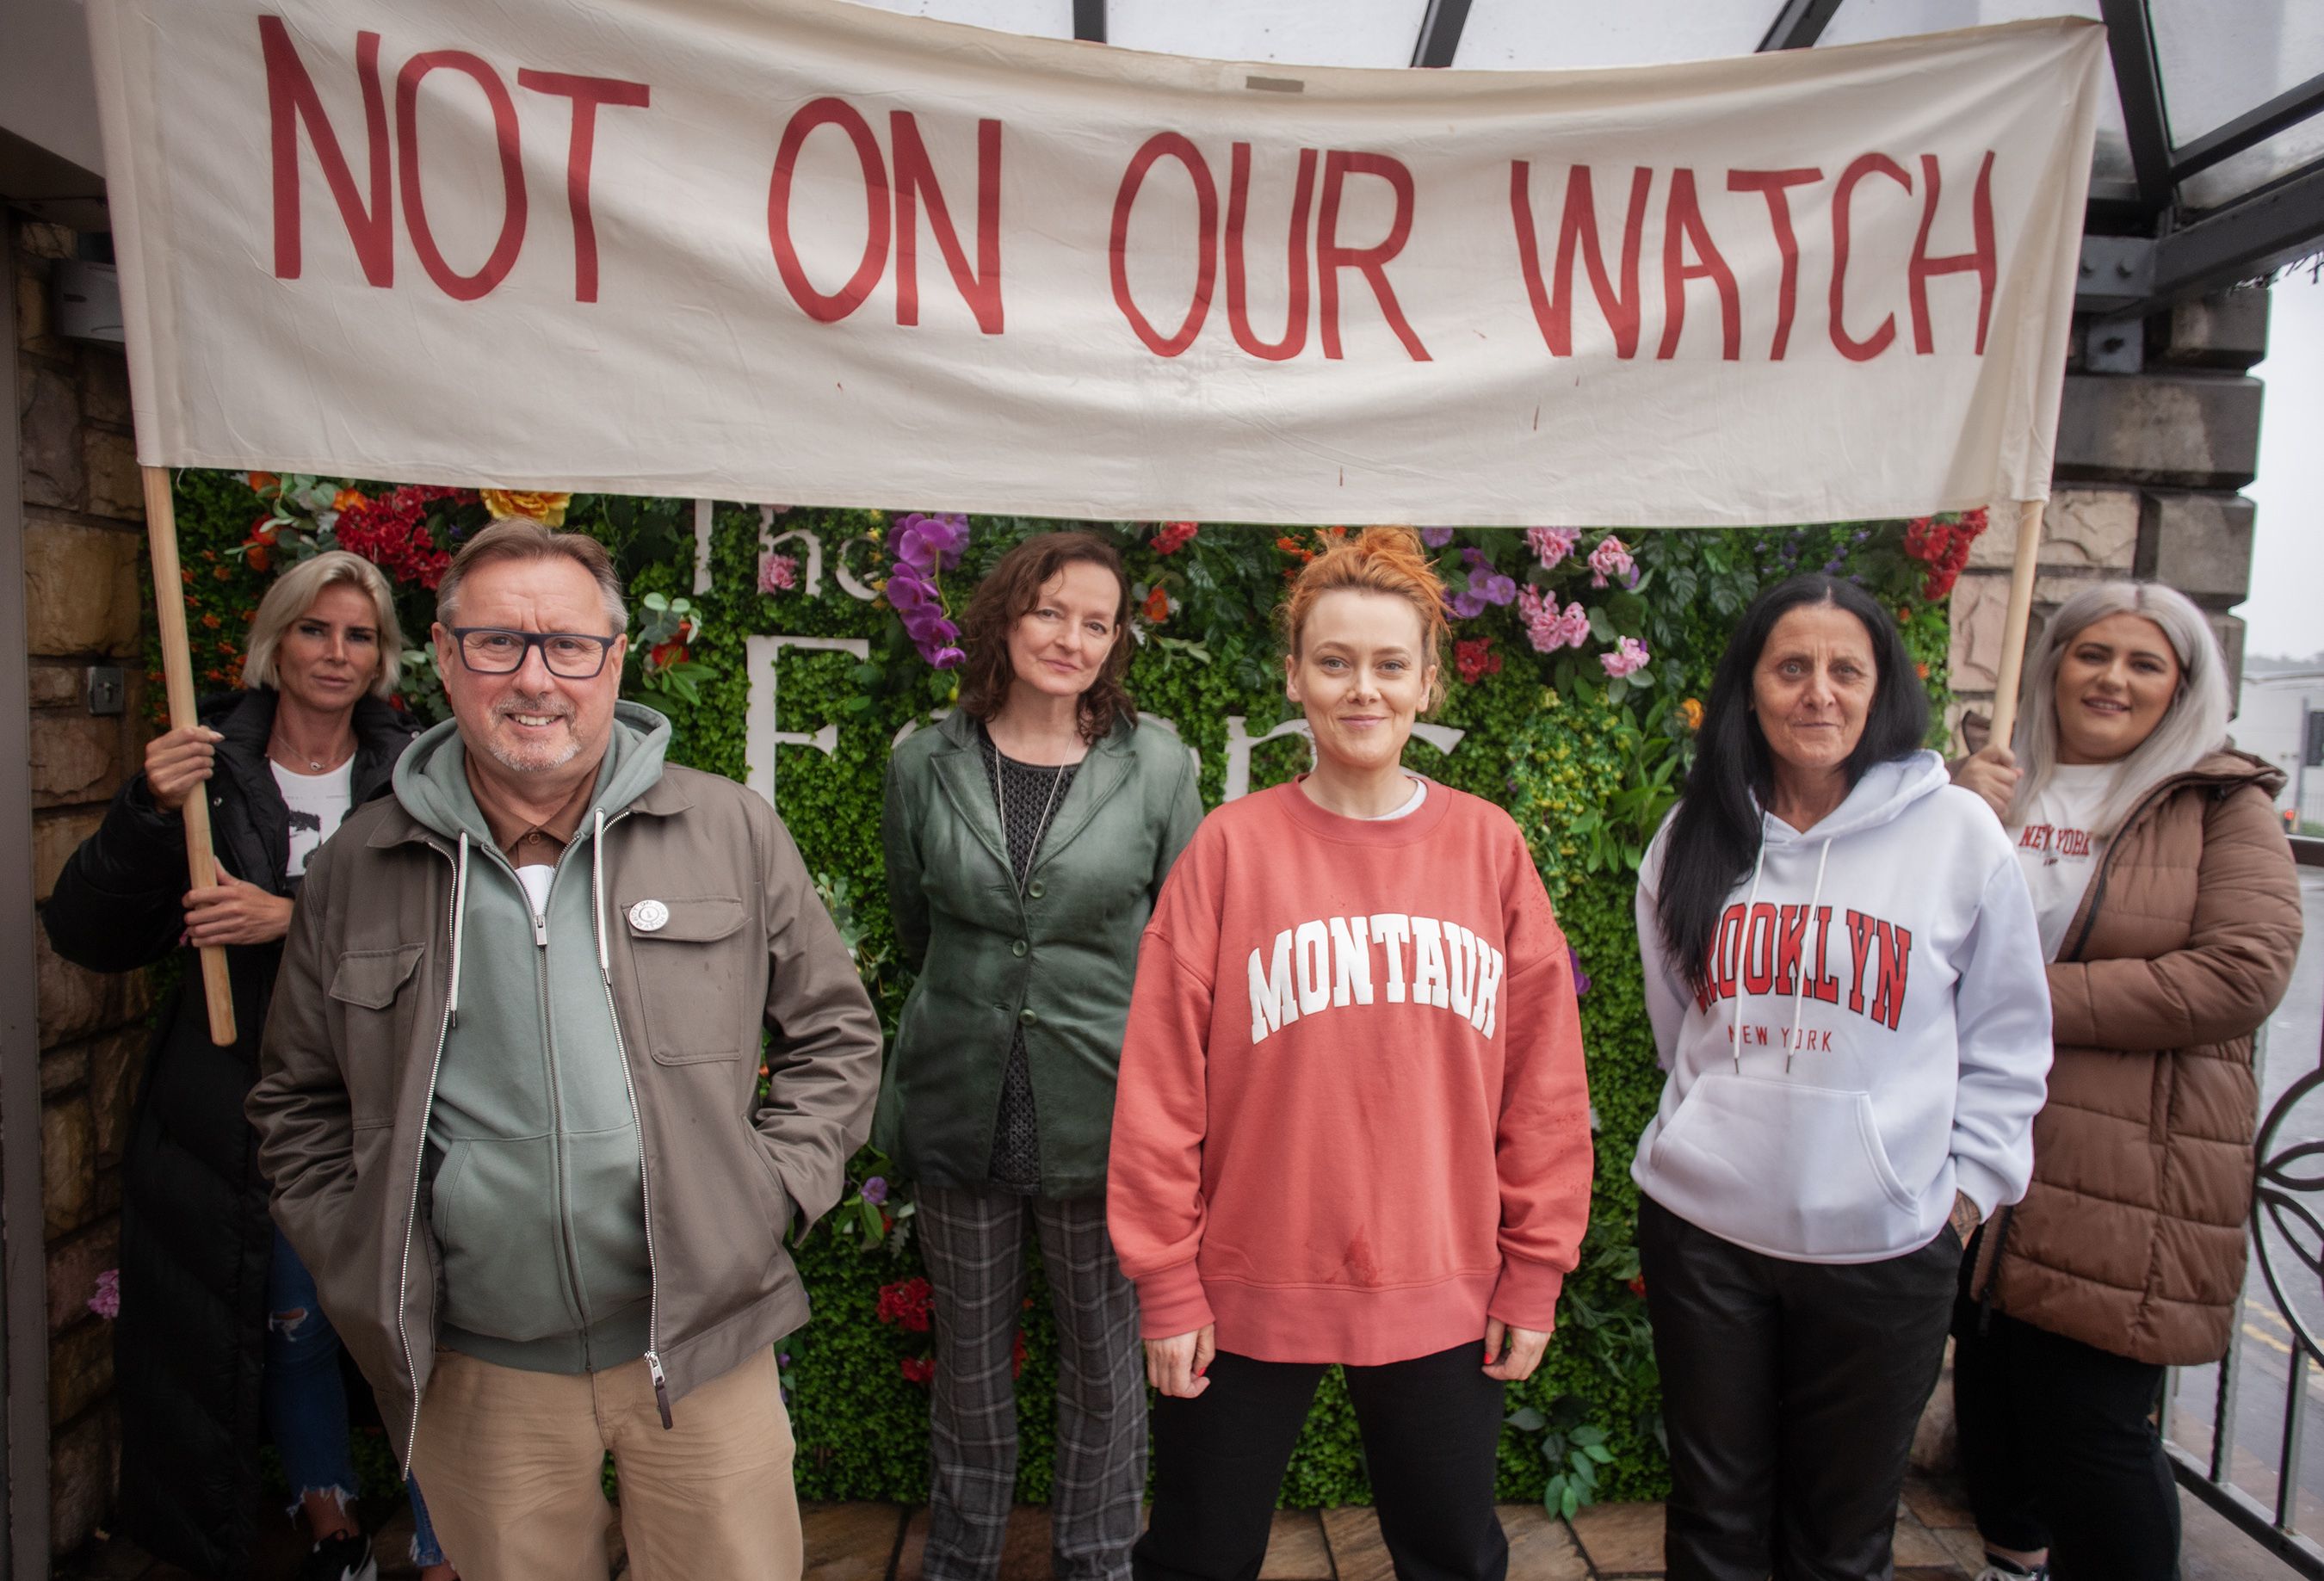 STADING TOGETHER: Worker Emma McCann with Davy Kettyles from Unite, Kabosh\'s Paula McFetridge, actor Bernadette Brown and workers Sonia and Caoimhe Kinghan